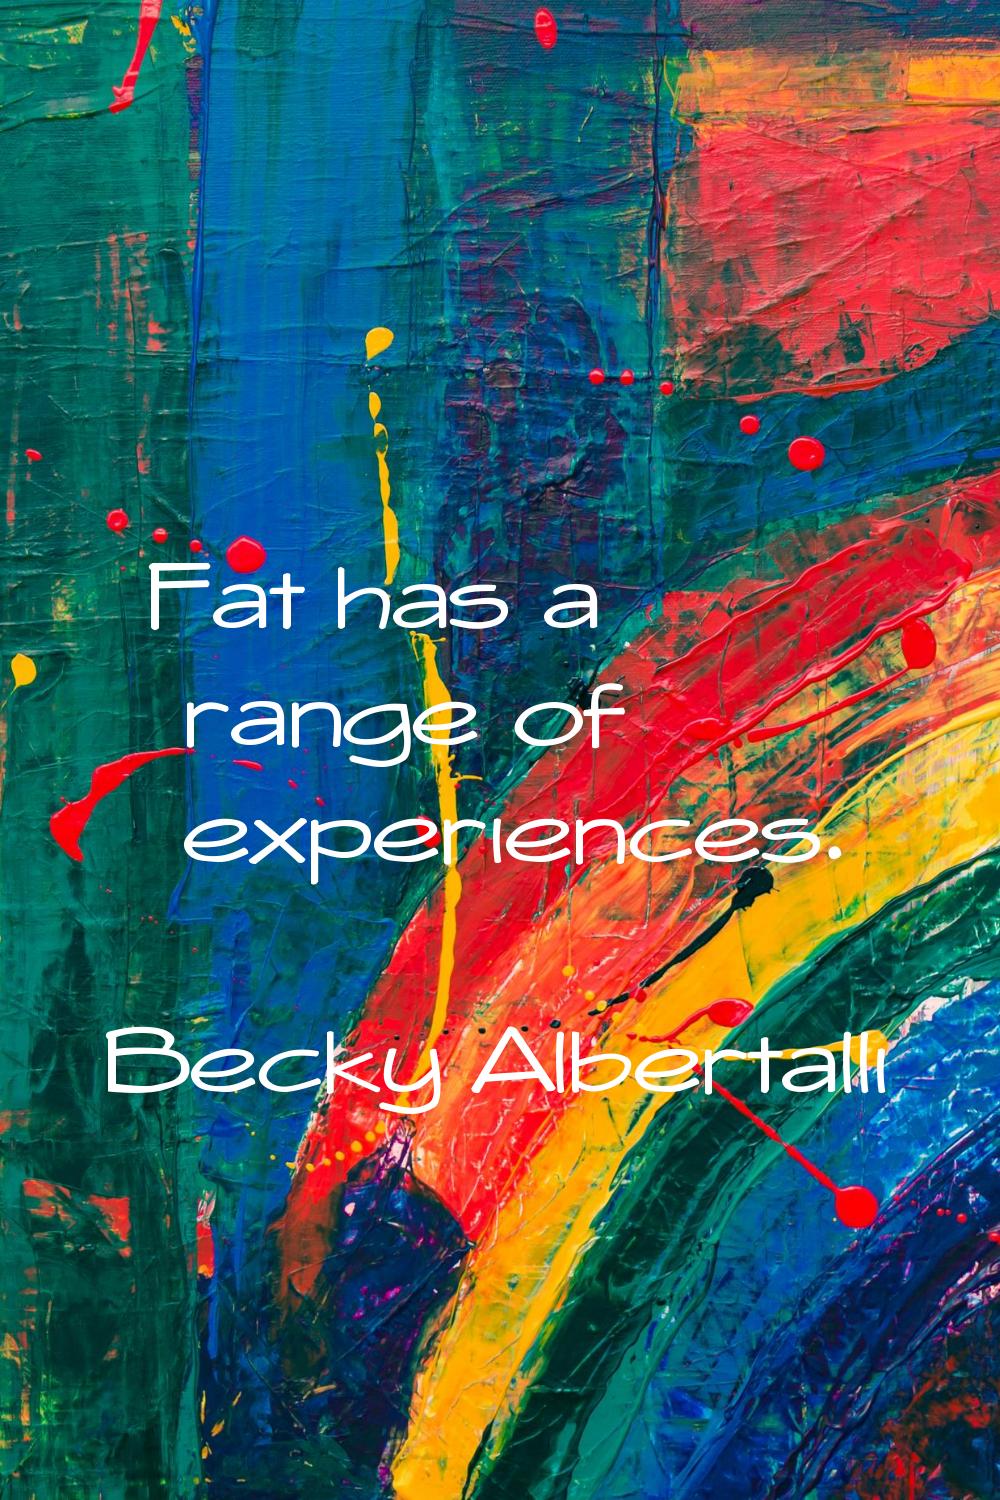 Fat has a range of experiences.